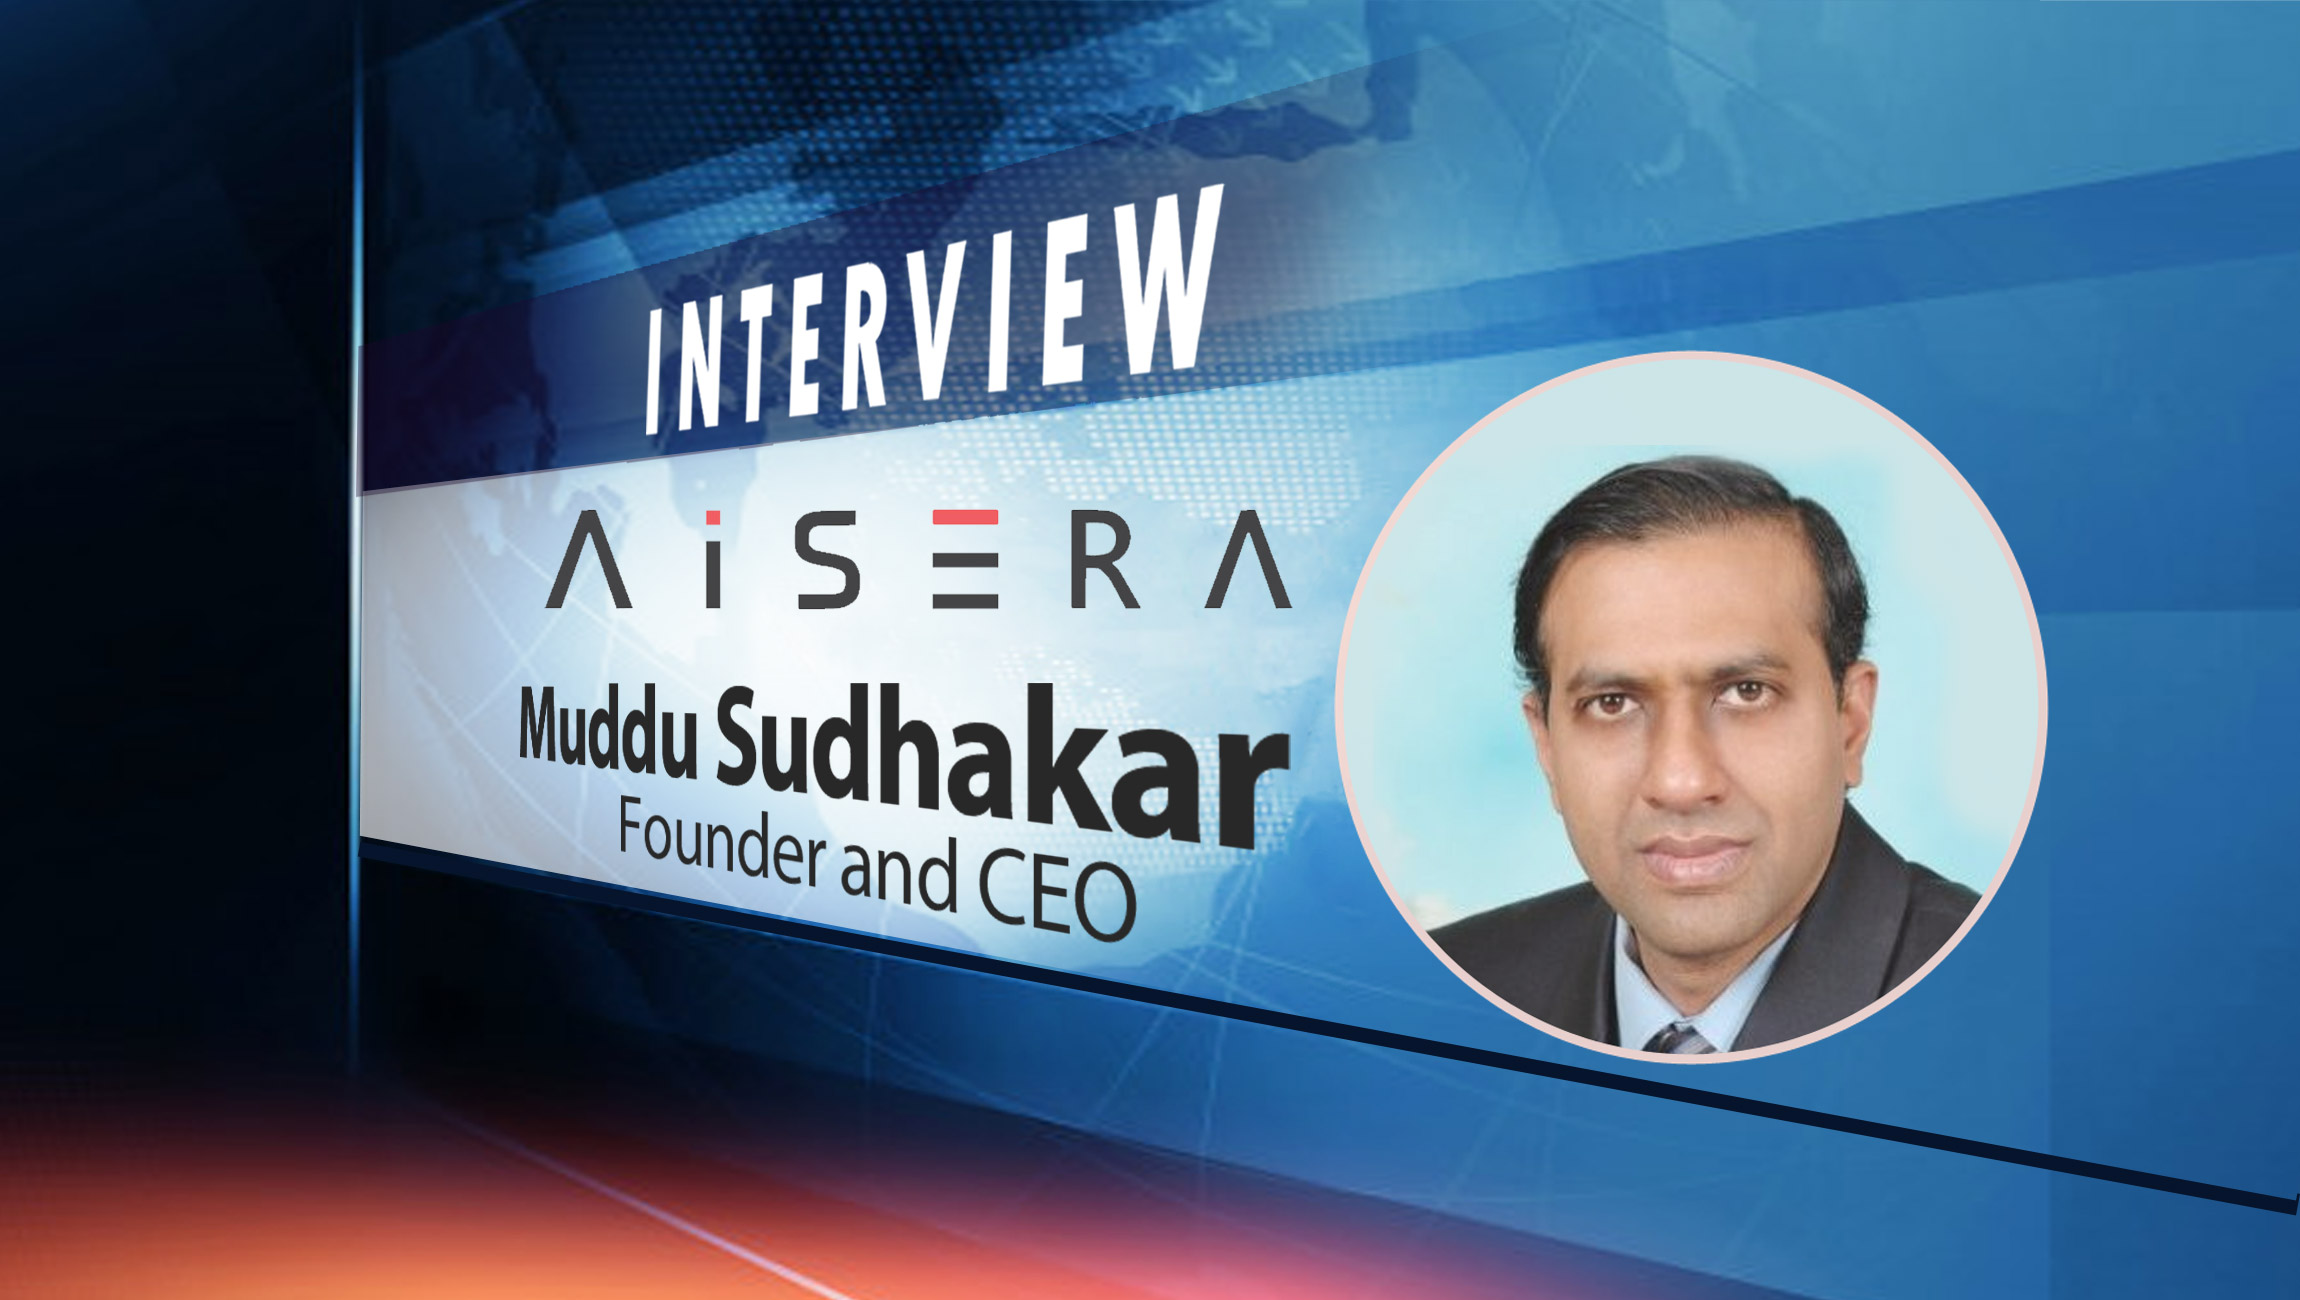 SalesTechStar Interview with Muddu Sudhakar, Founder and CEO at Aisera